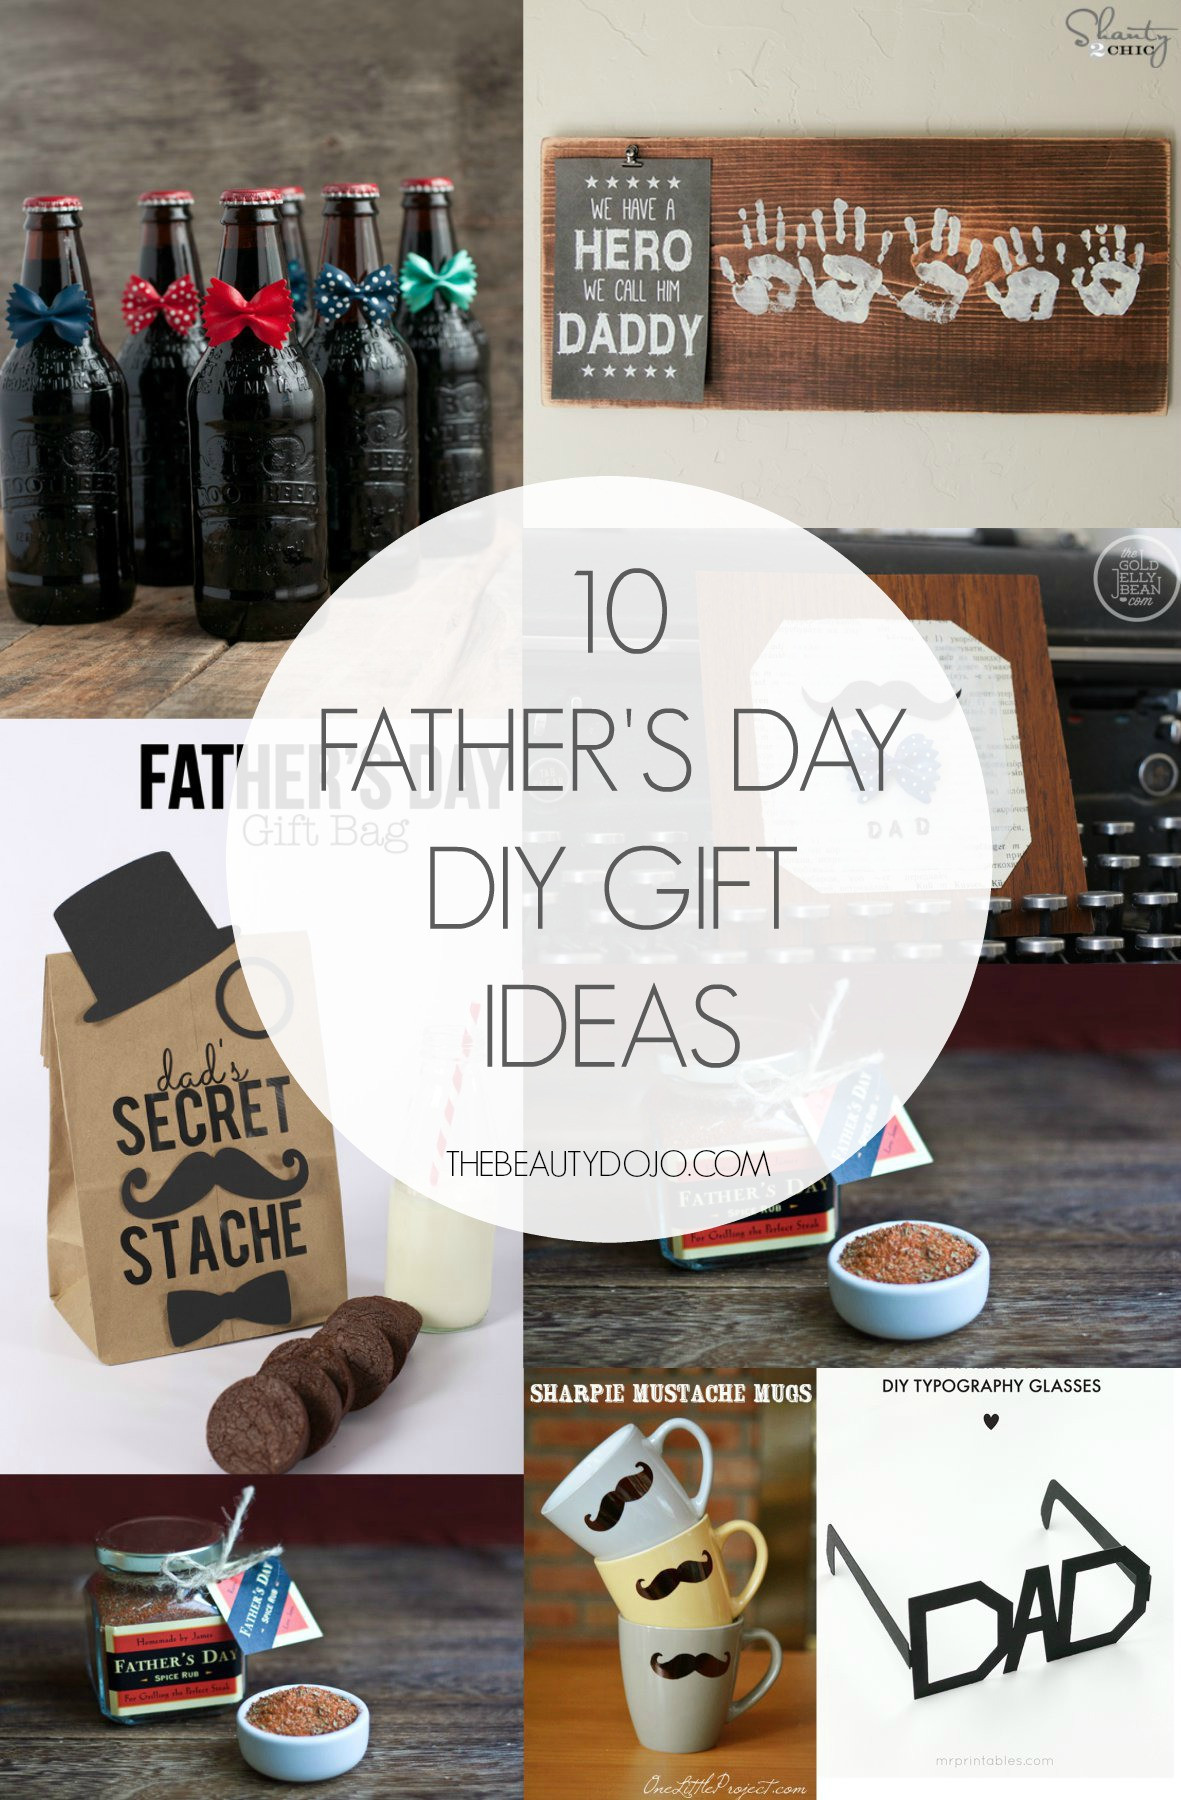 Diy Fathers Day Gifts
 10 Father s Day DIY Gift Ideas The Beautydojo